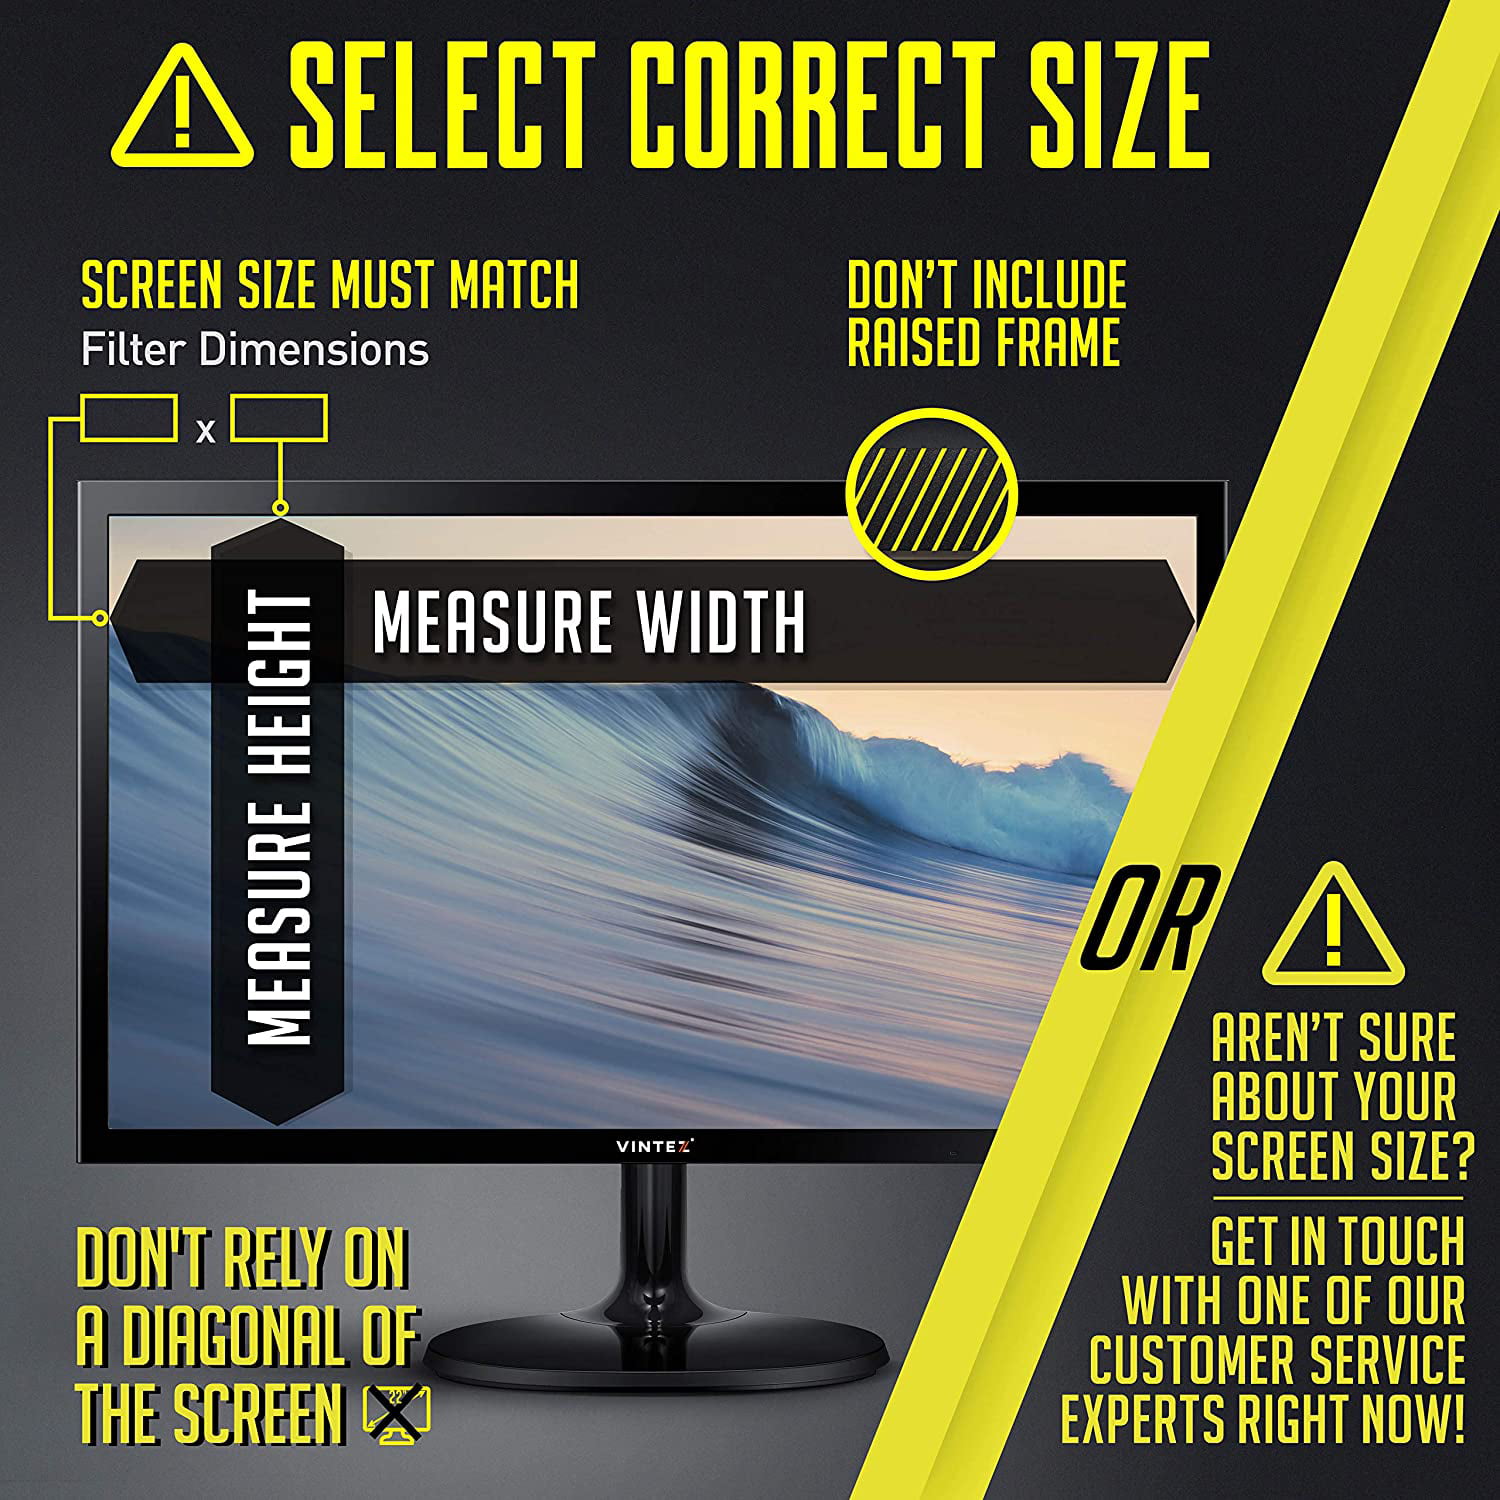 Anti-Scratch Protector Film Computer Privacy Screen Filter for Square Computer Monitor Anti-Glare 20.1 Inch We Offer 2 Different 20.1 Filter Sizes 4:3 Aspect Ratio